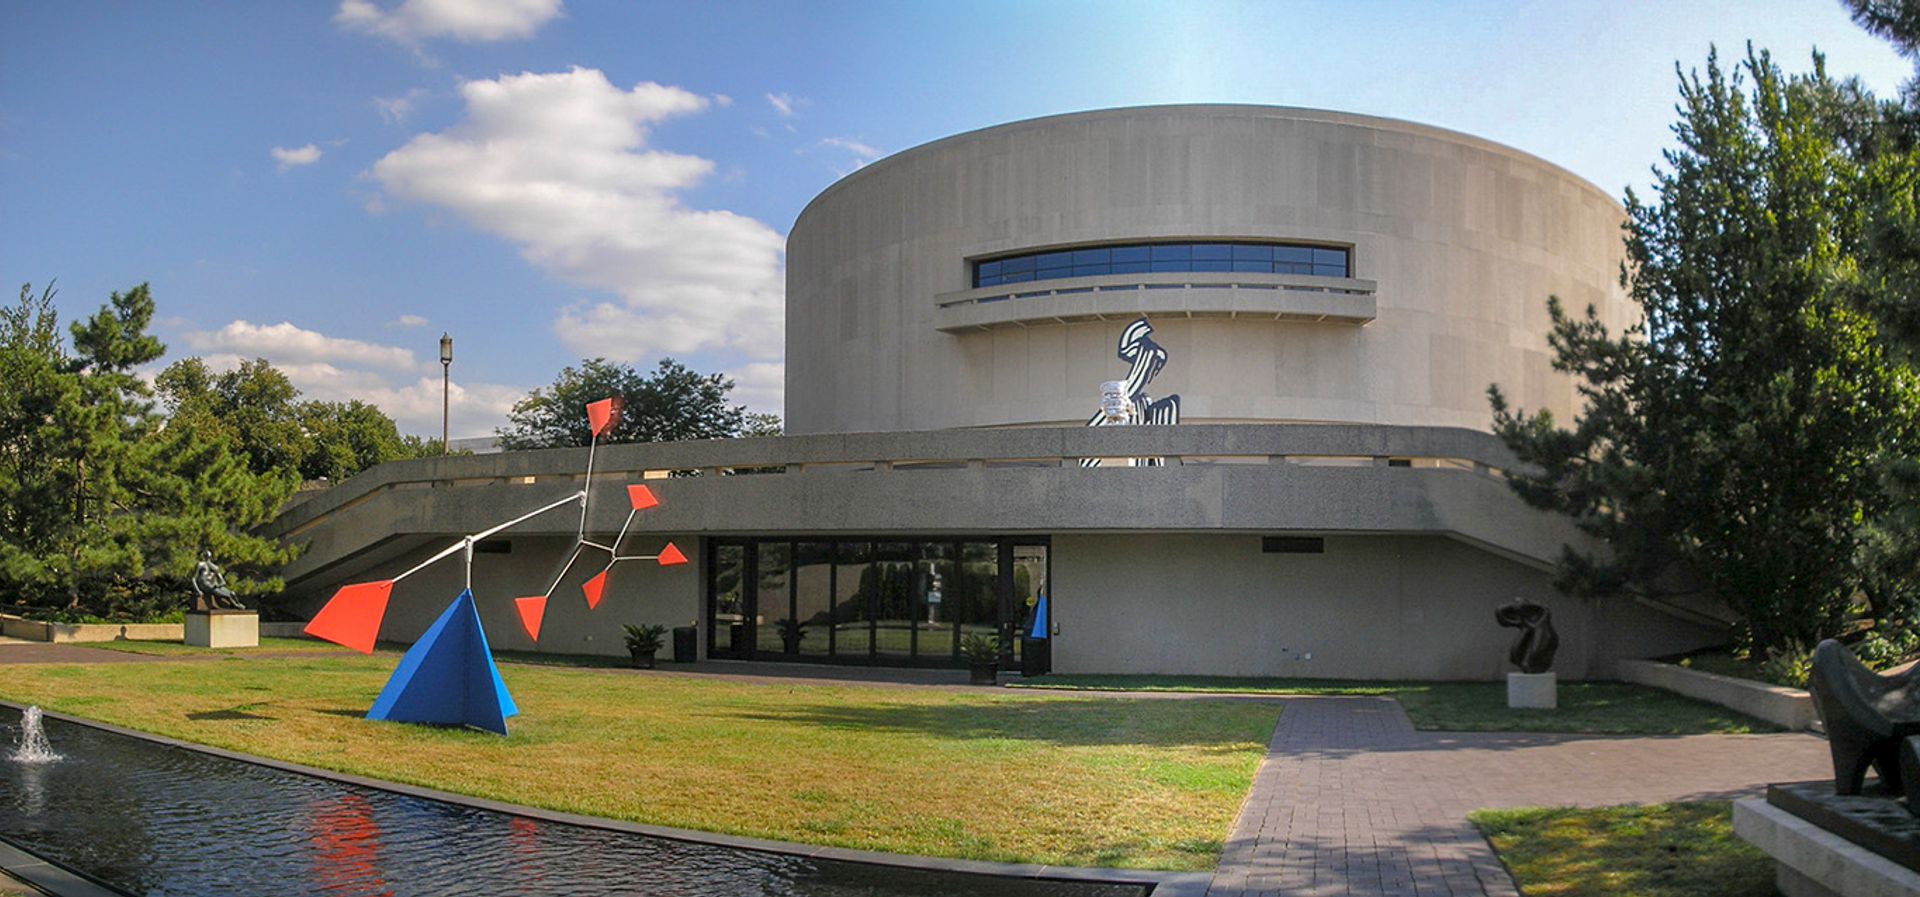 The Hirshhorn Museum and Sculpture Garden in Washington DC. As designed by Gordon Bunshaft, a rectangular pool in the garden echoes a window and balcony on the 1974 museum's façade. Courtesy of Wikimedia Commons